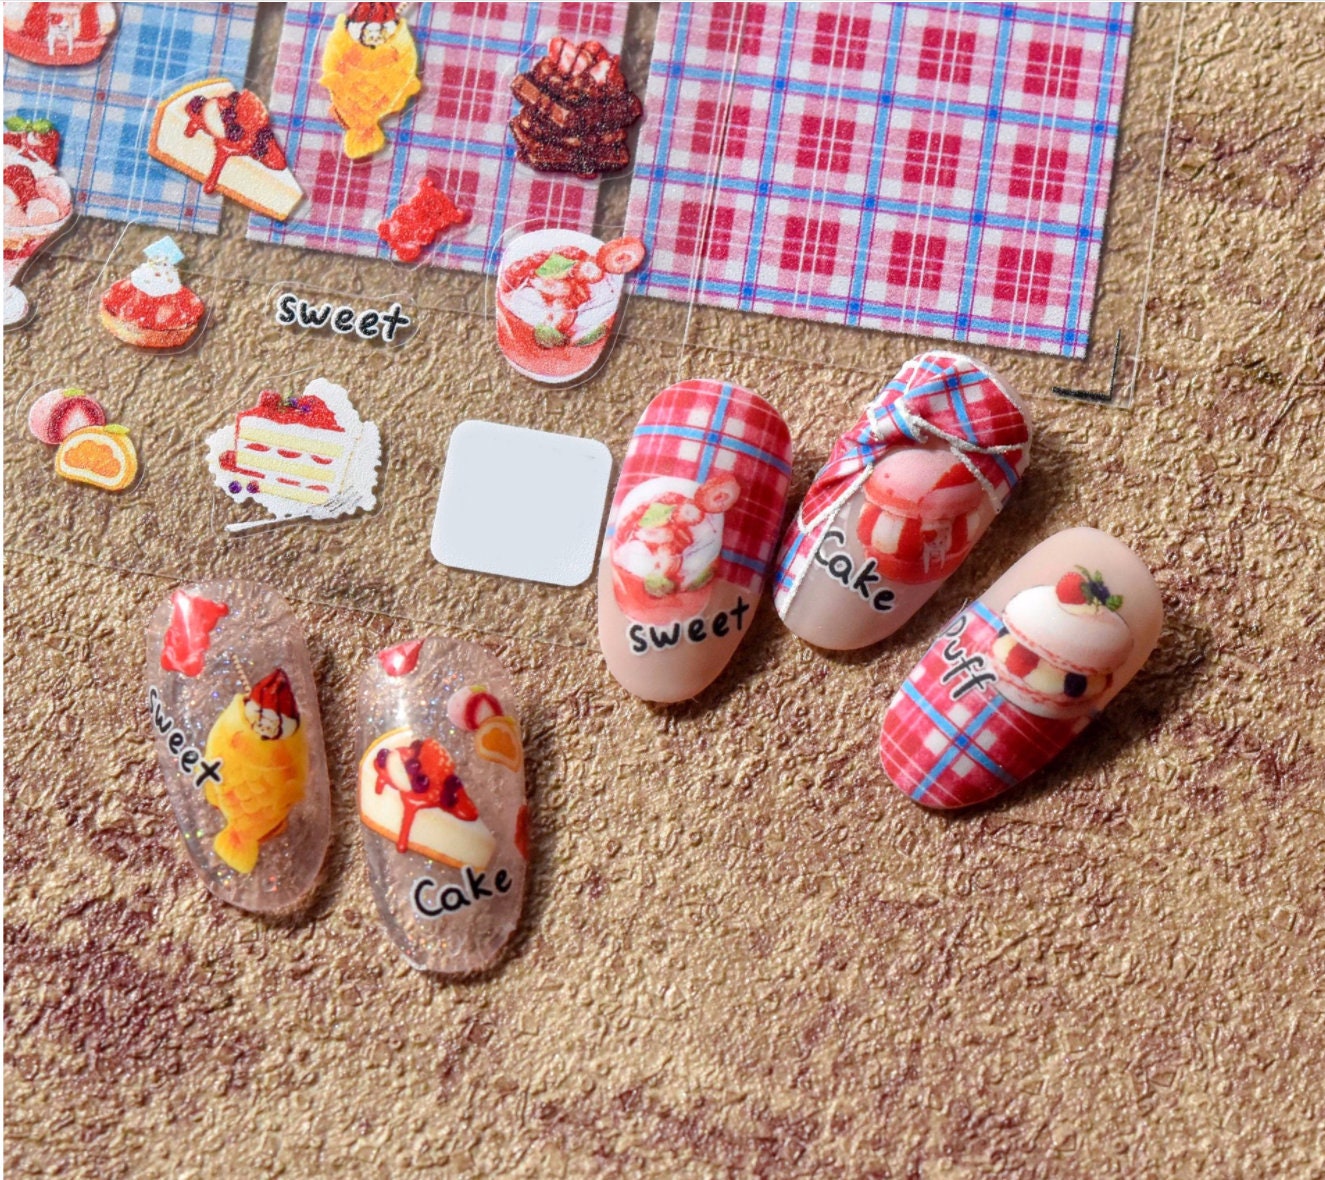 Foodie nail sticker/Burger Pizza Fries Macaron Cake Sweets Nail Art Stickers Self Adhesive Decals/Ultra Thin peel off kids nails